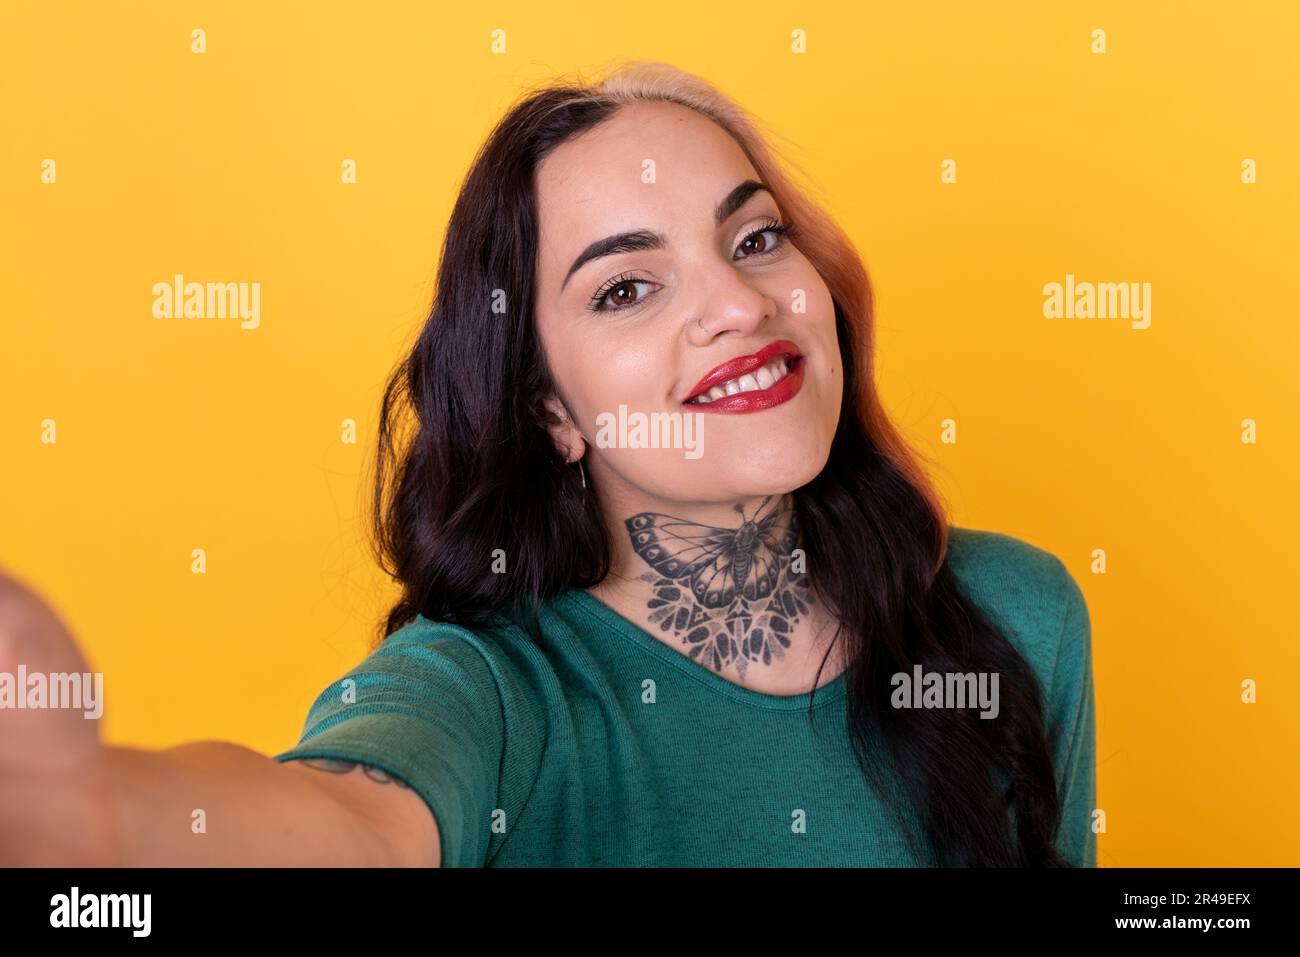 Portrait of an attractive woman making a selfie over yellow background. Studio shot. Stock Photo